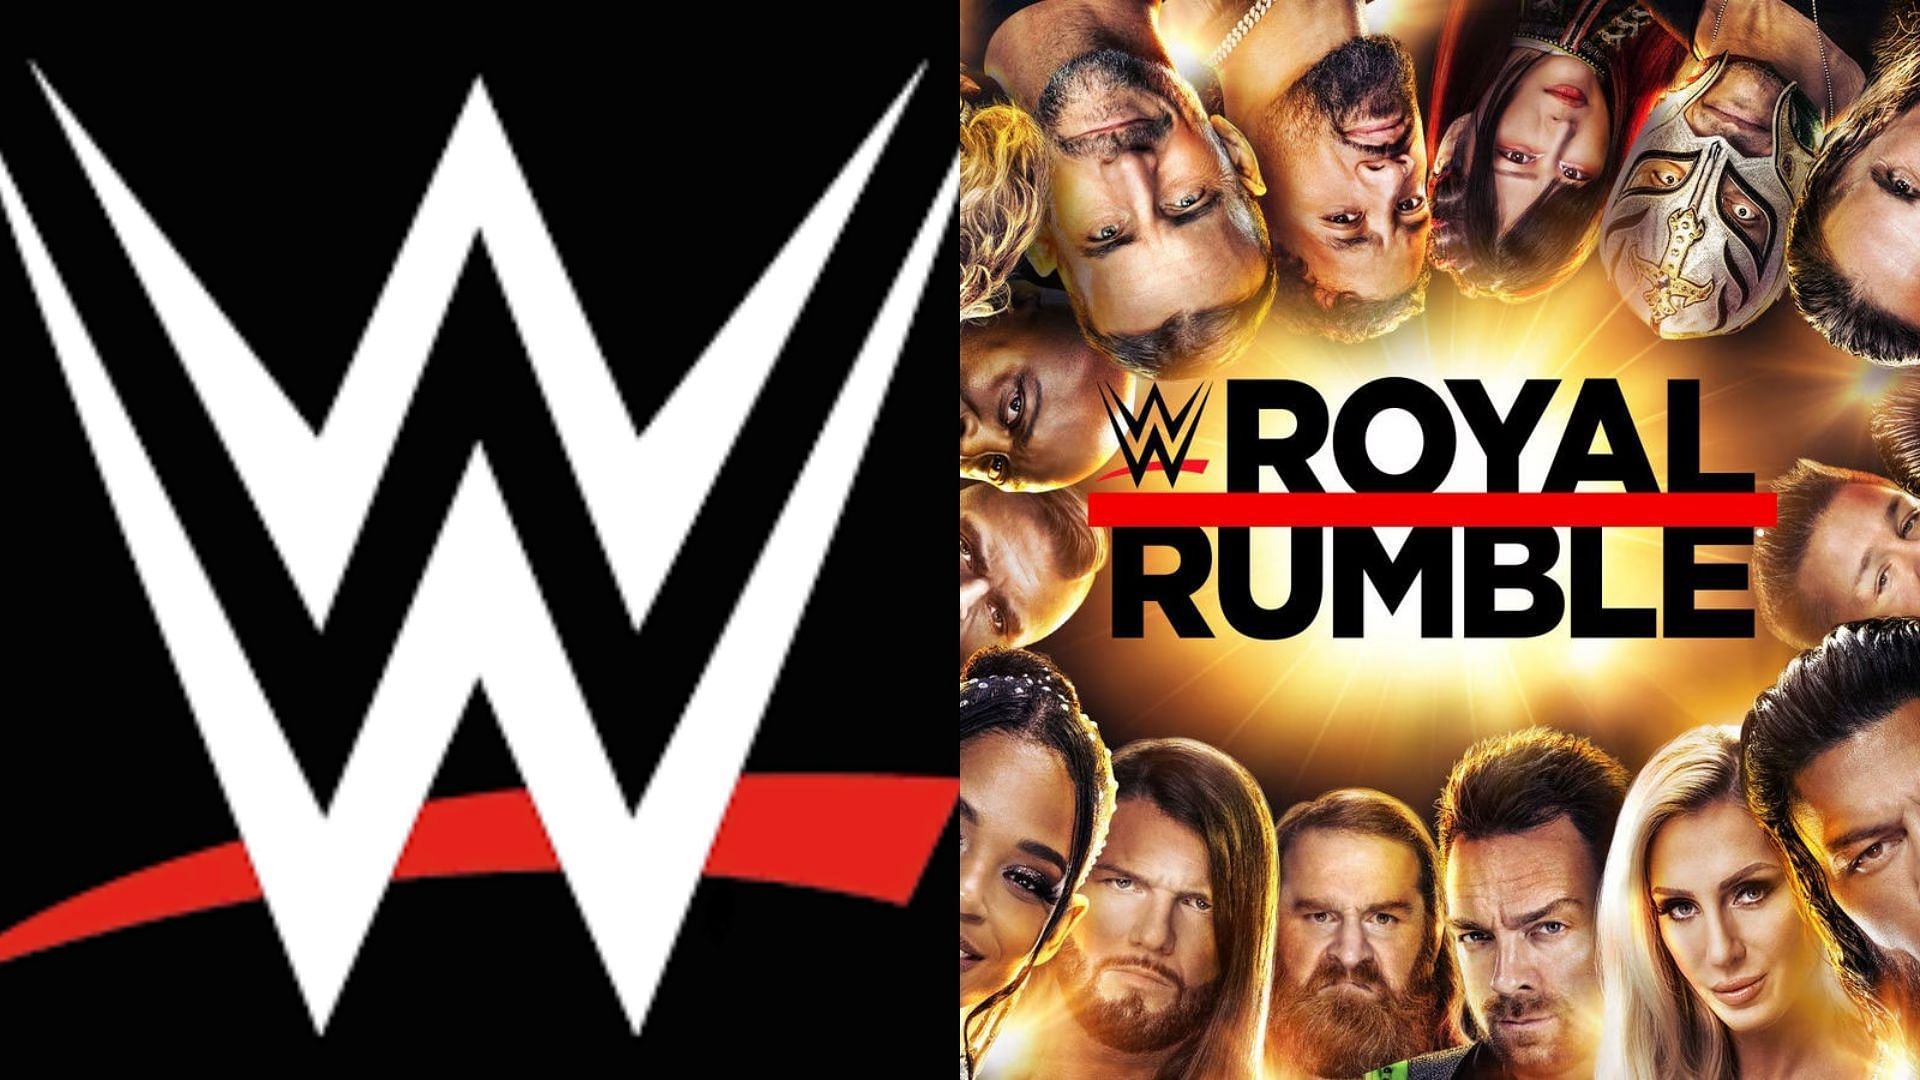 The popular WWE superstar made his return in the Royal Rumble match